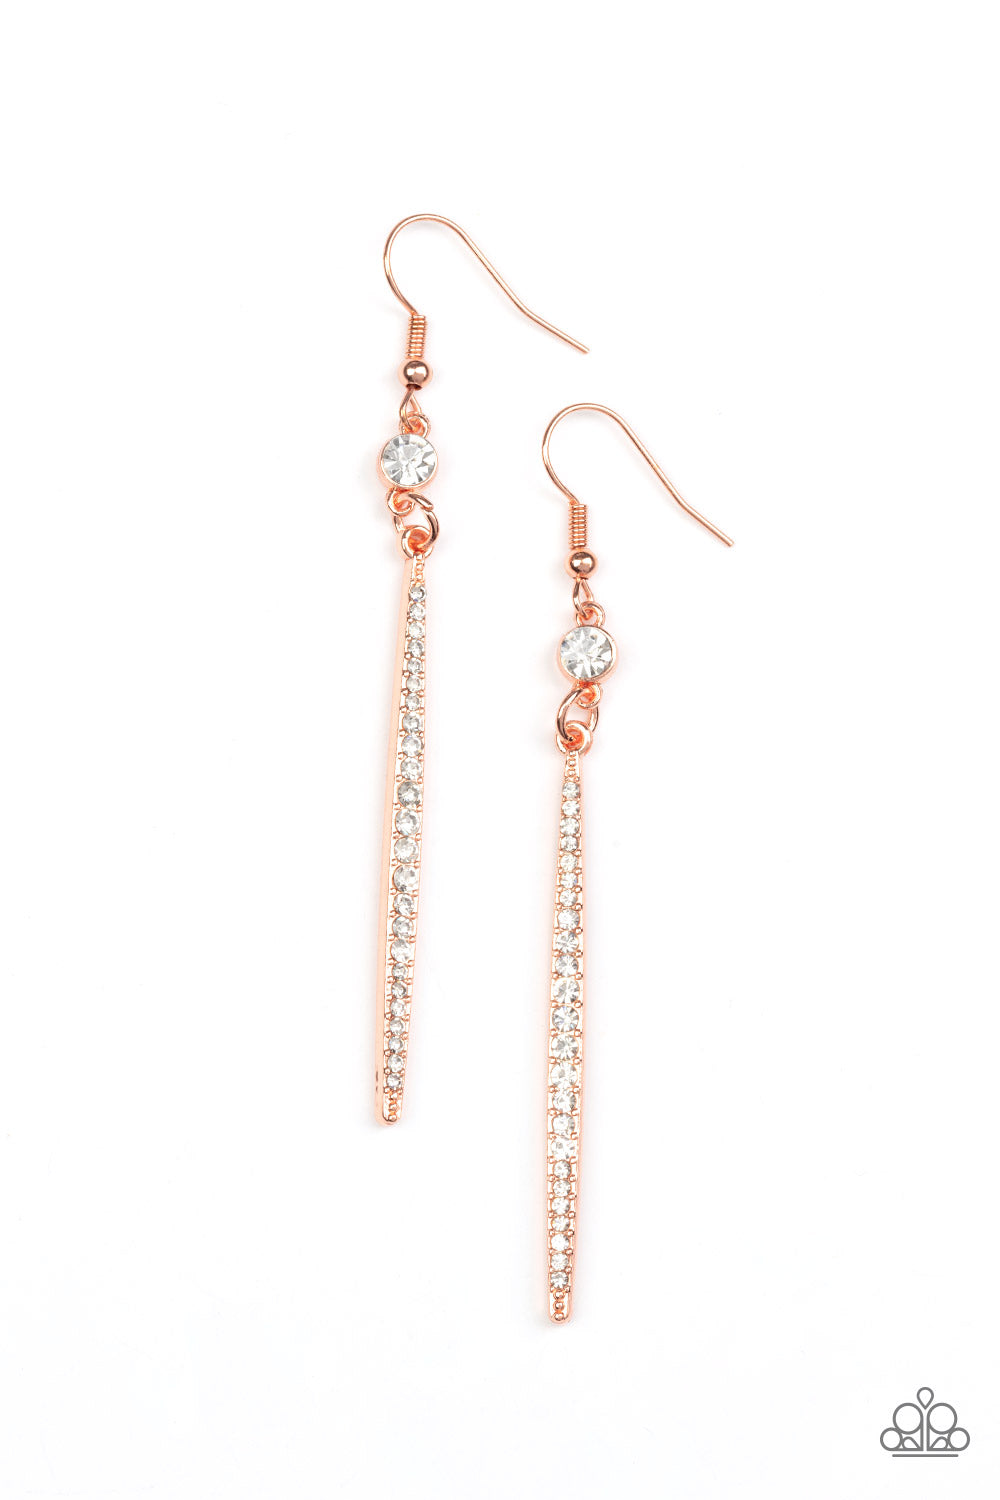 Paparazzi Accessories Skyscraping Shimmer - Copper Earrings